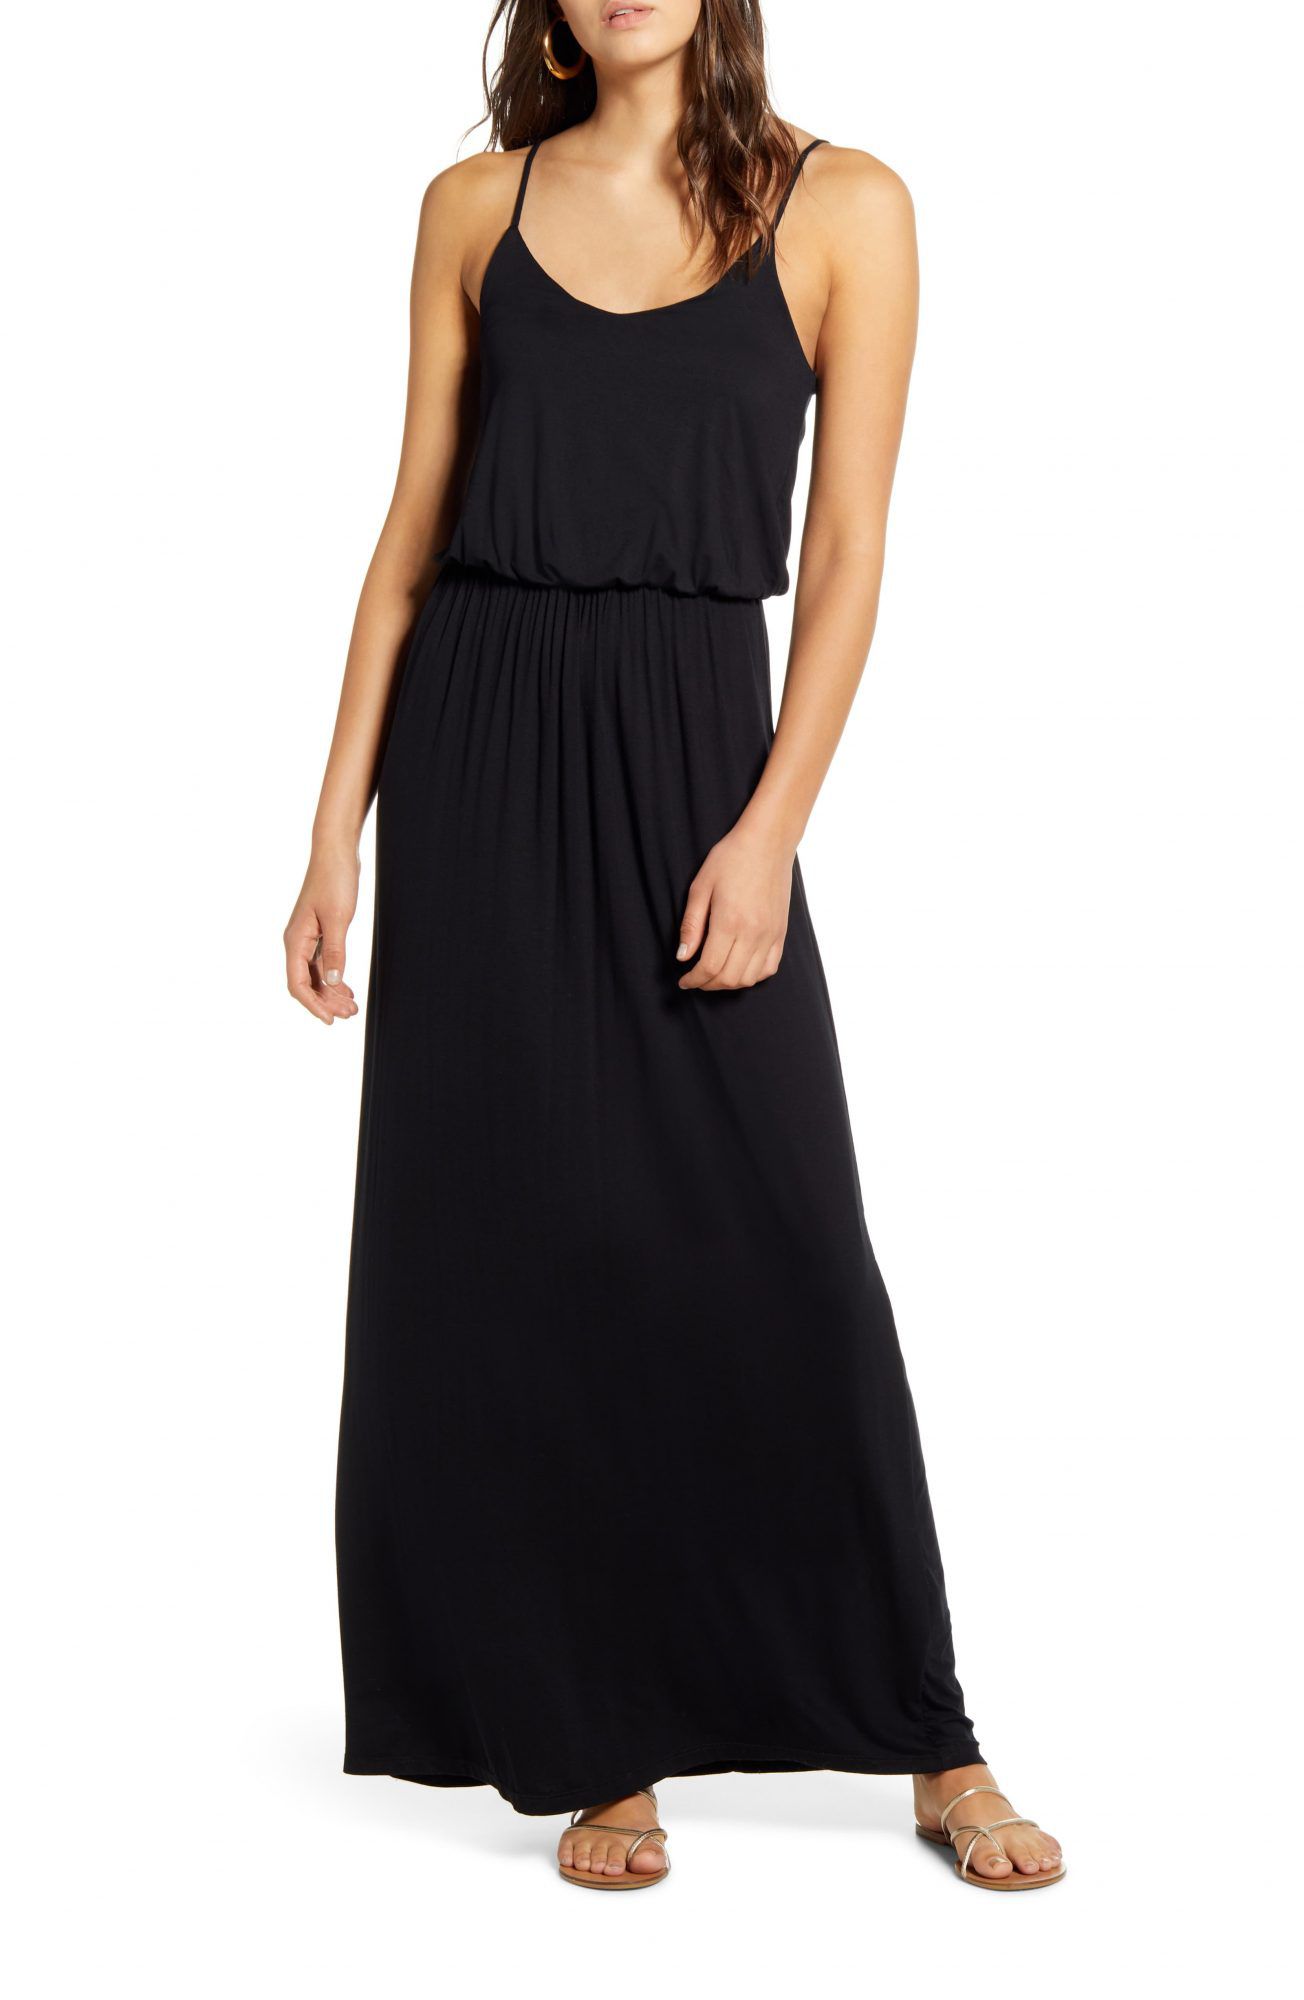 Nordstrom’s Popular All in Favor Maxi Dress Is On Sale | PEOPLE.com